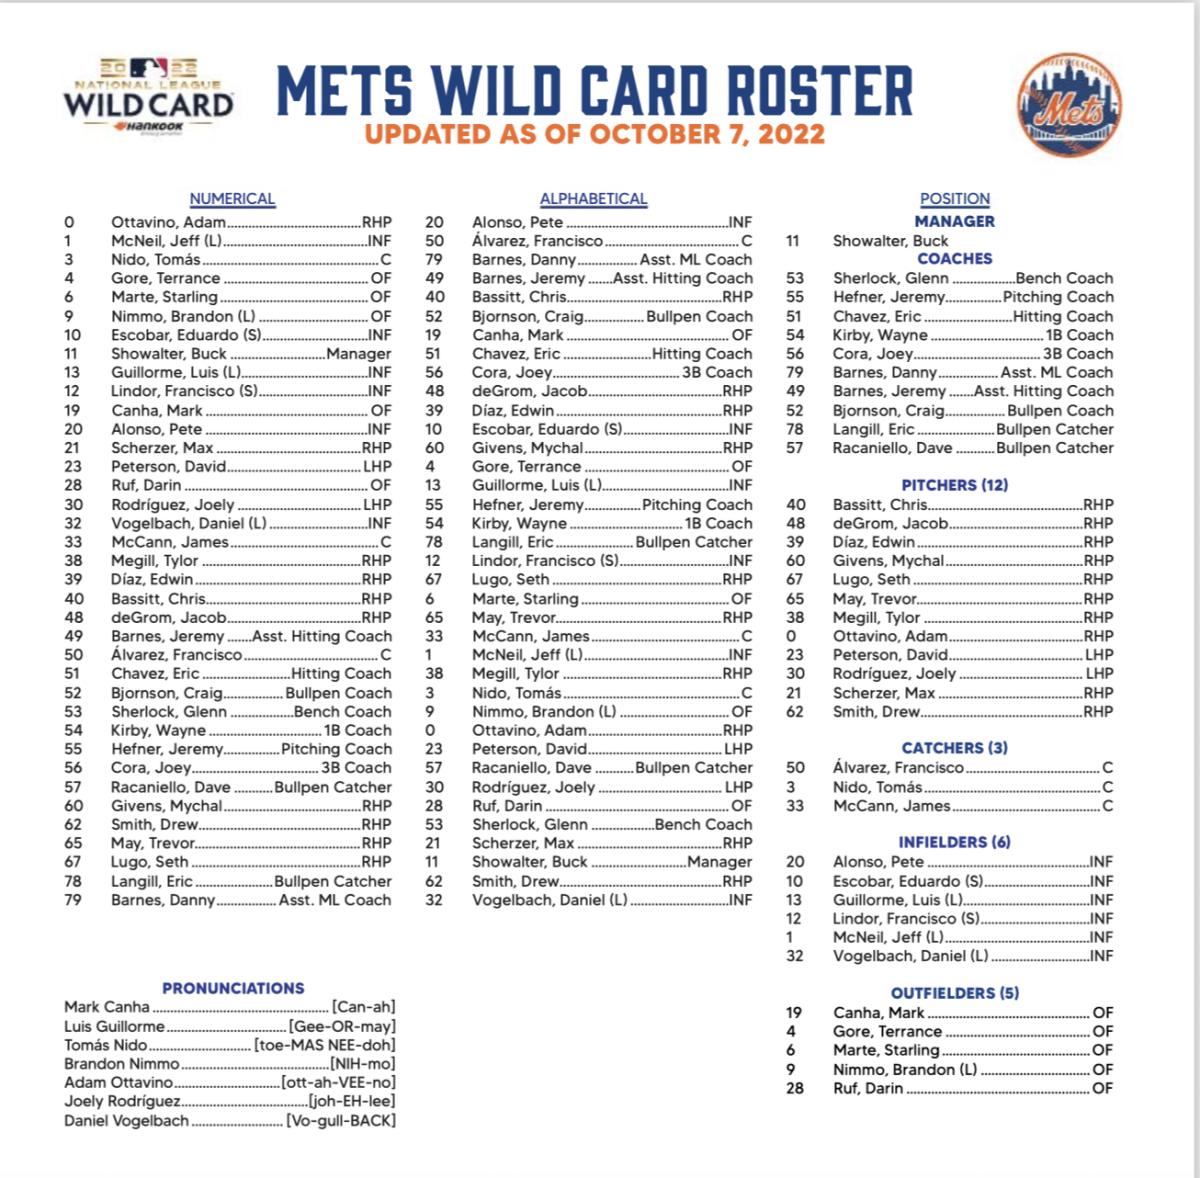 Mets Wild Card roster